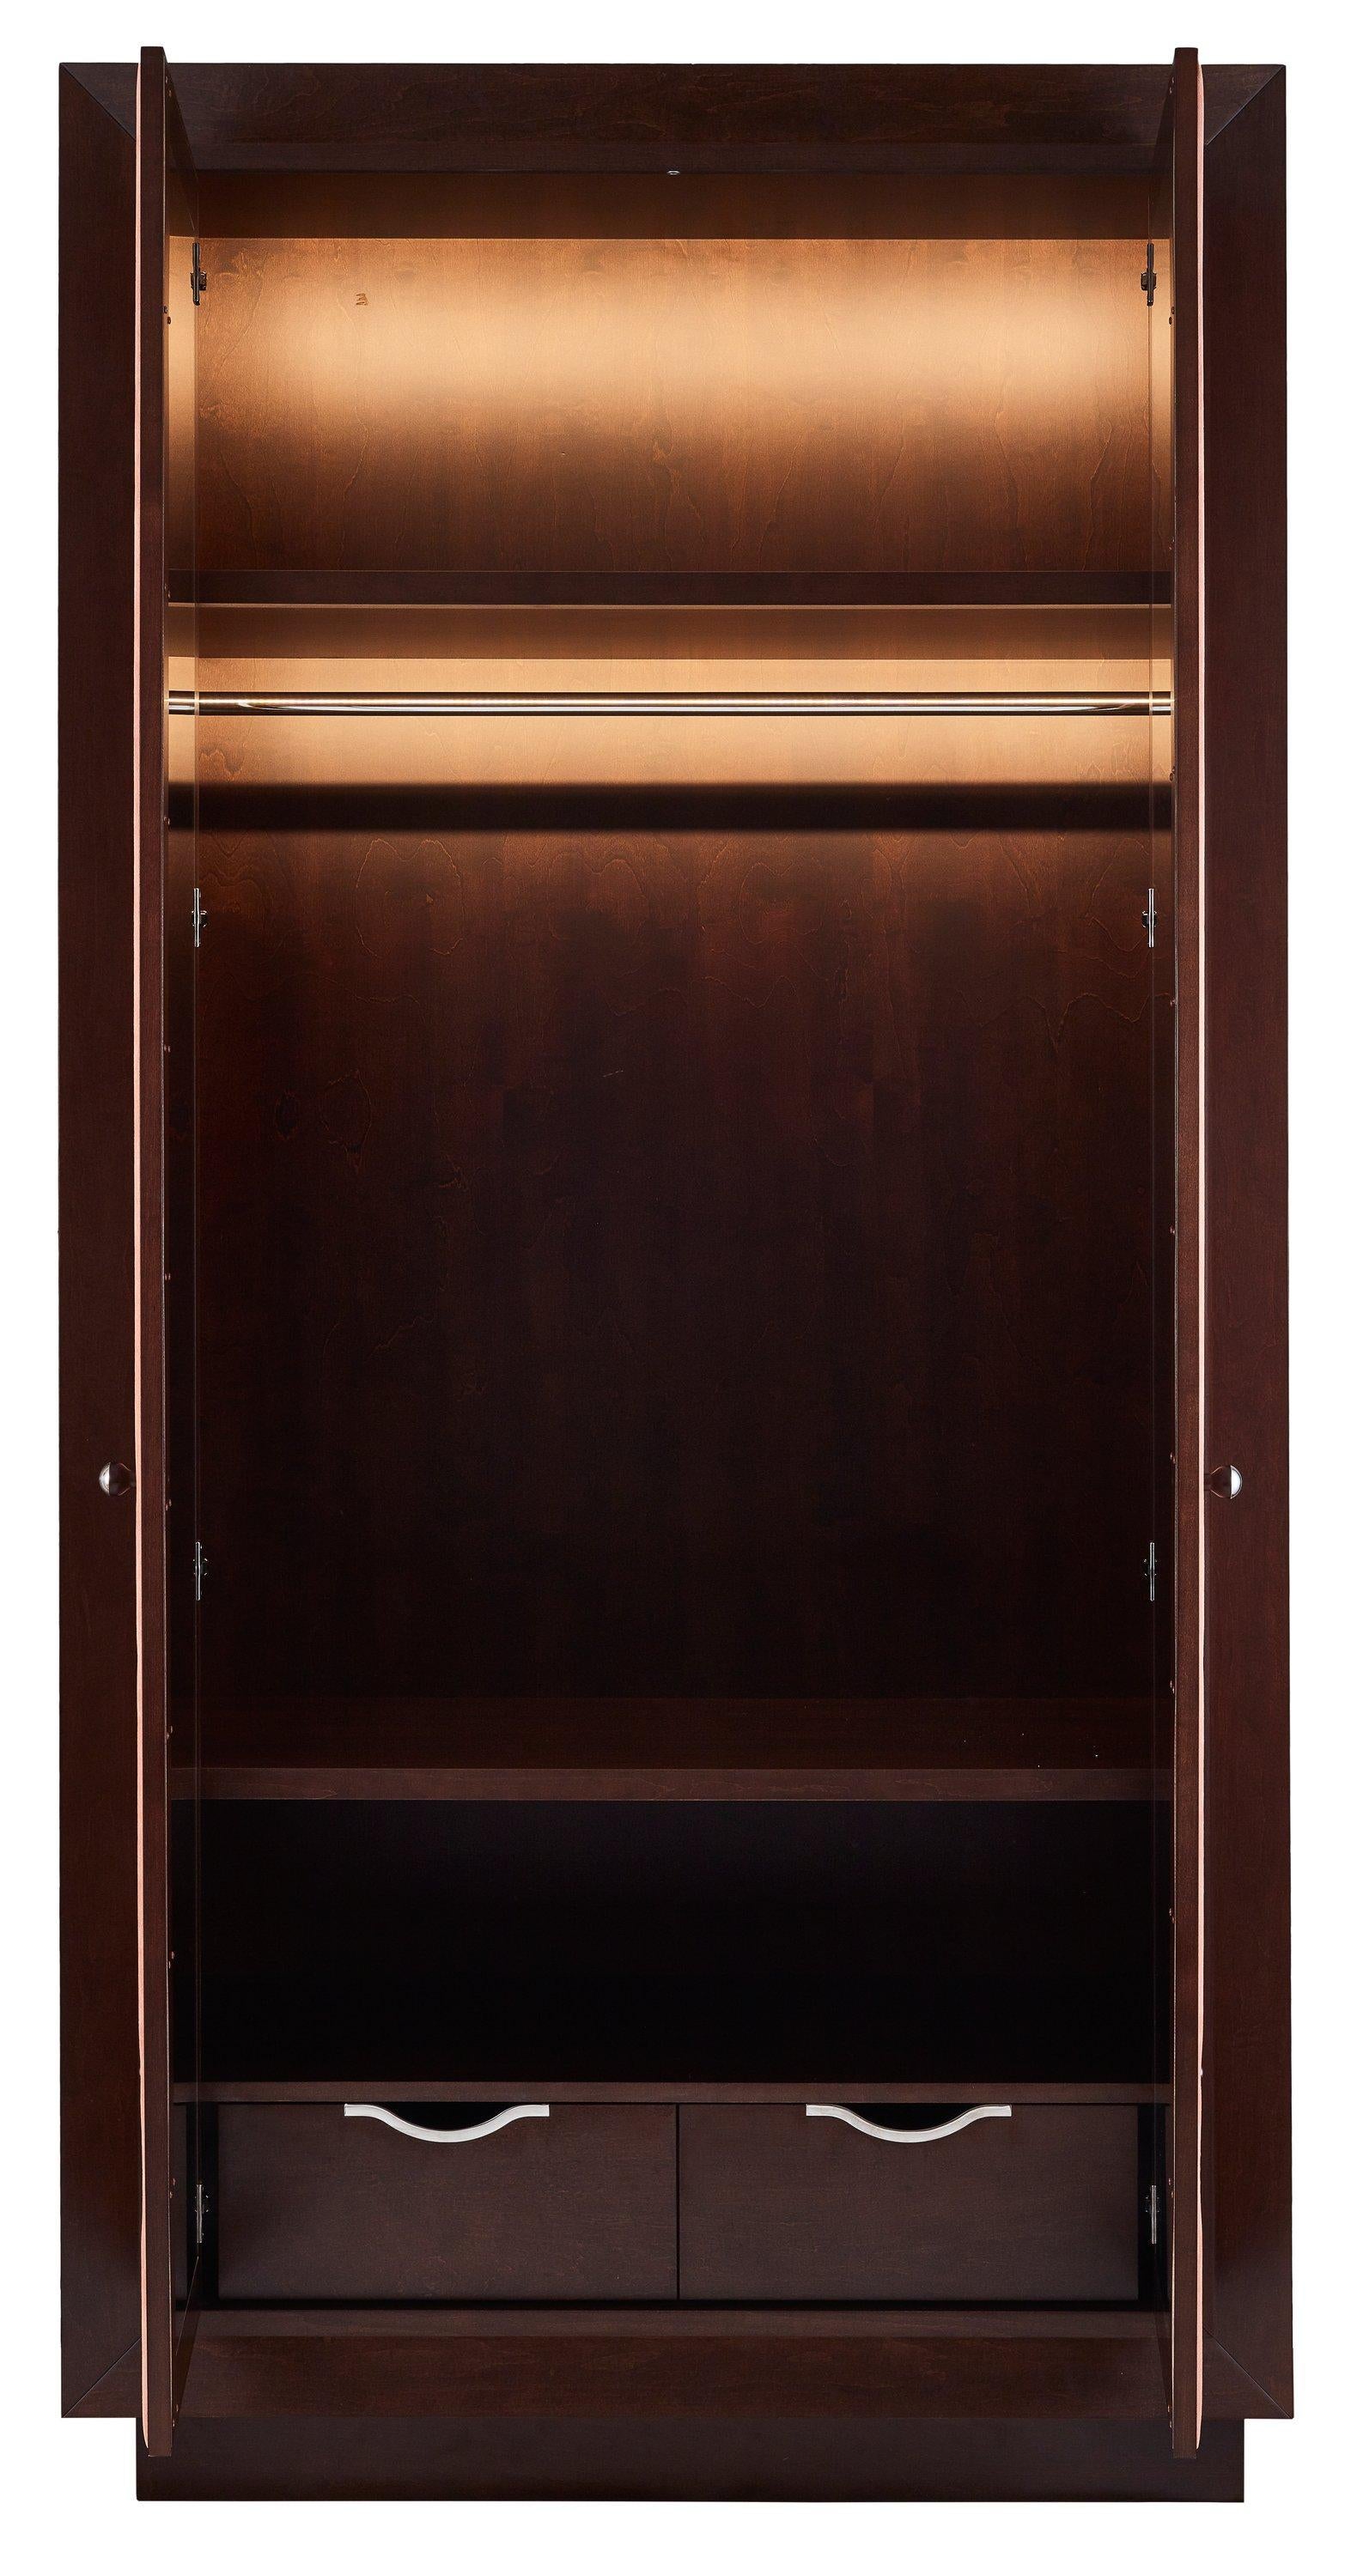 The high wardrobe is finished with fine tinted sycamore veneer and salmon Alcantara on door panels. The panels are decorated with the pattern of chrome-plated studs. The fern-like poetic pattern brings here the magic of enchanted forests. 
The